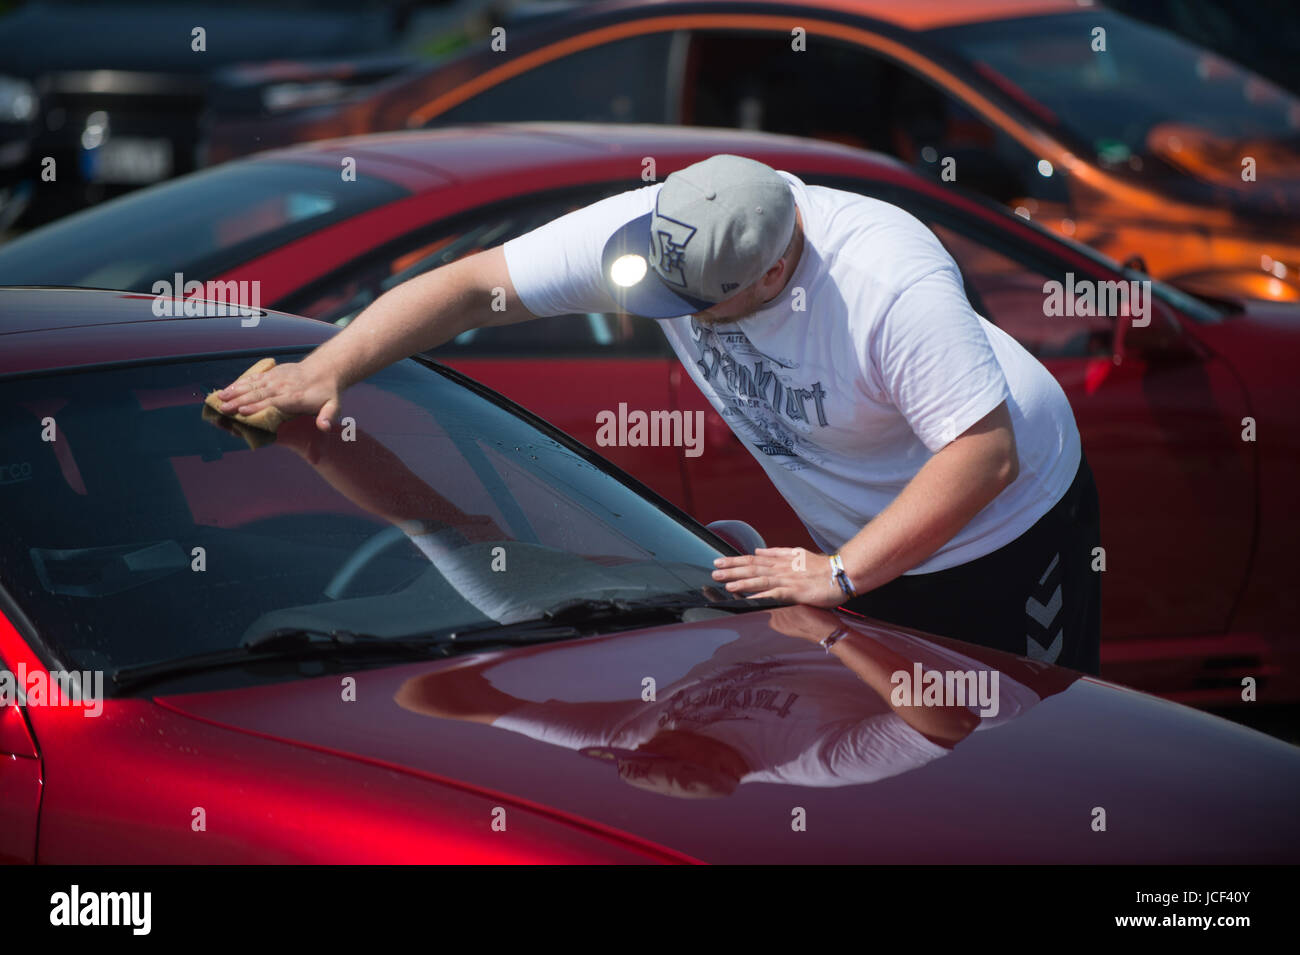 Daniel Heine from Frankfurt polishes his Opel Calibra from the year 1994  during the Opel Meeting in Oschersleben, Germany, 15 June 2017. The varnish  of the car is a candy gloss called "